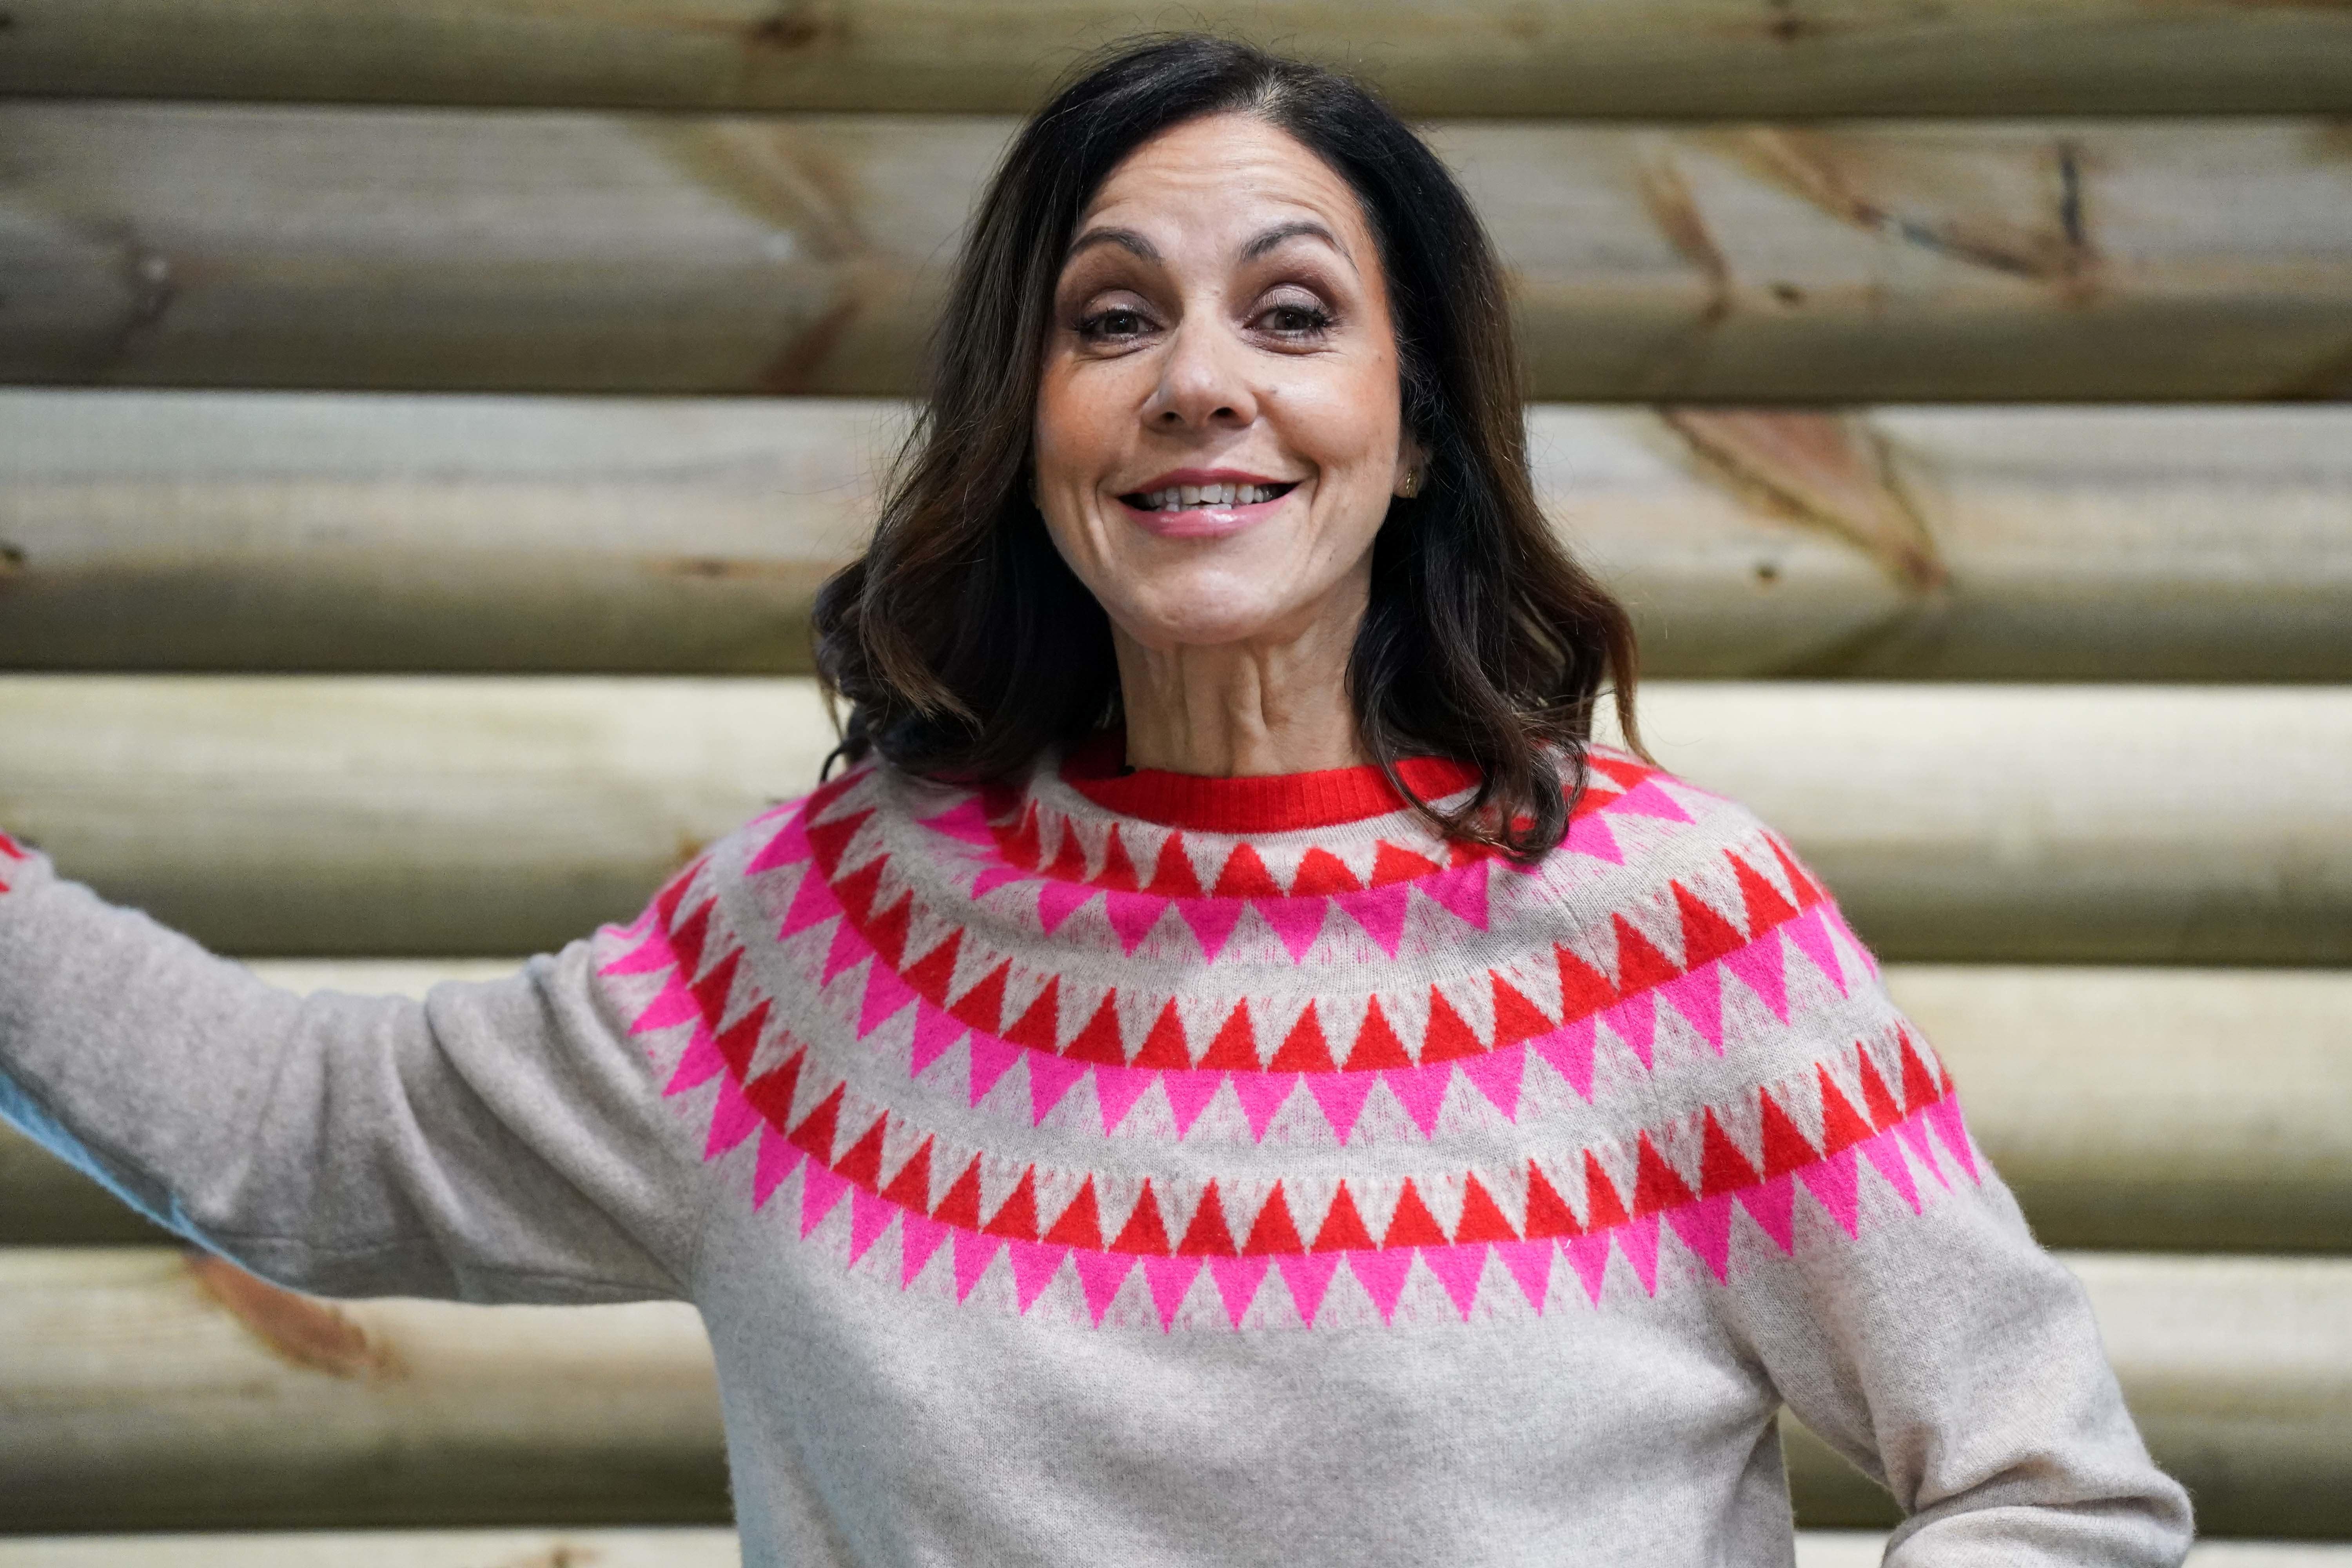 TV presenter Julia Bradbury said she rings her mother ‘every day’ to tell her to go for a walk (Jacob King/PA)